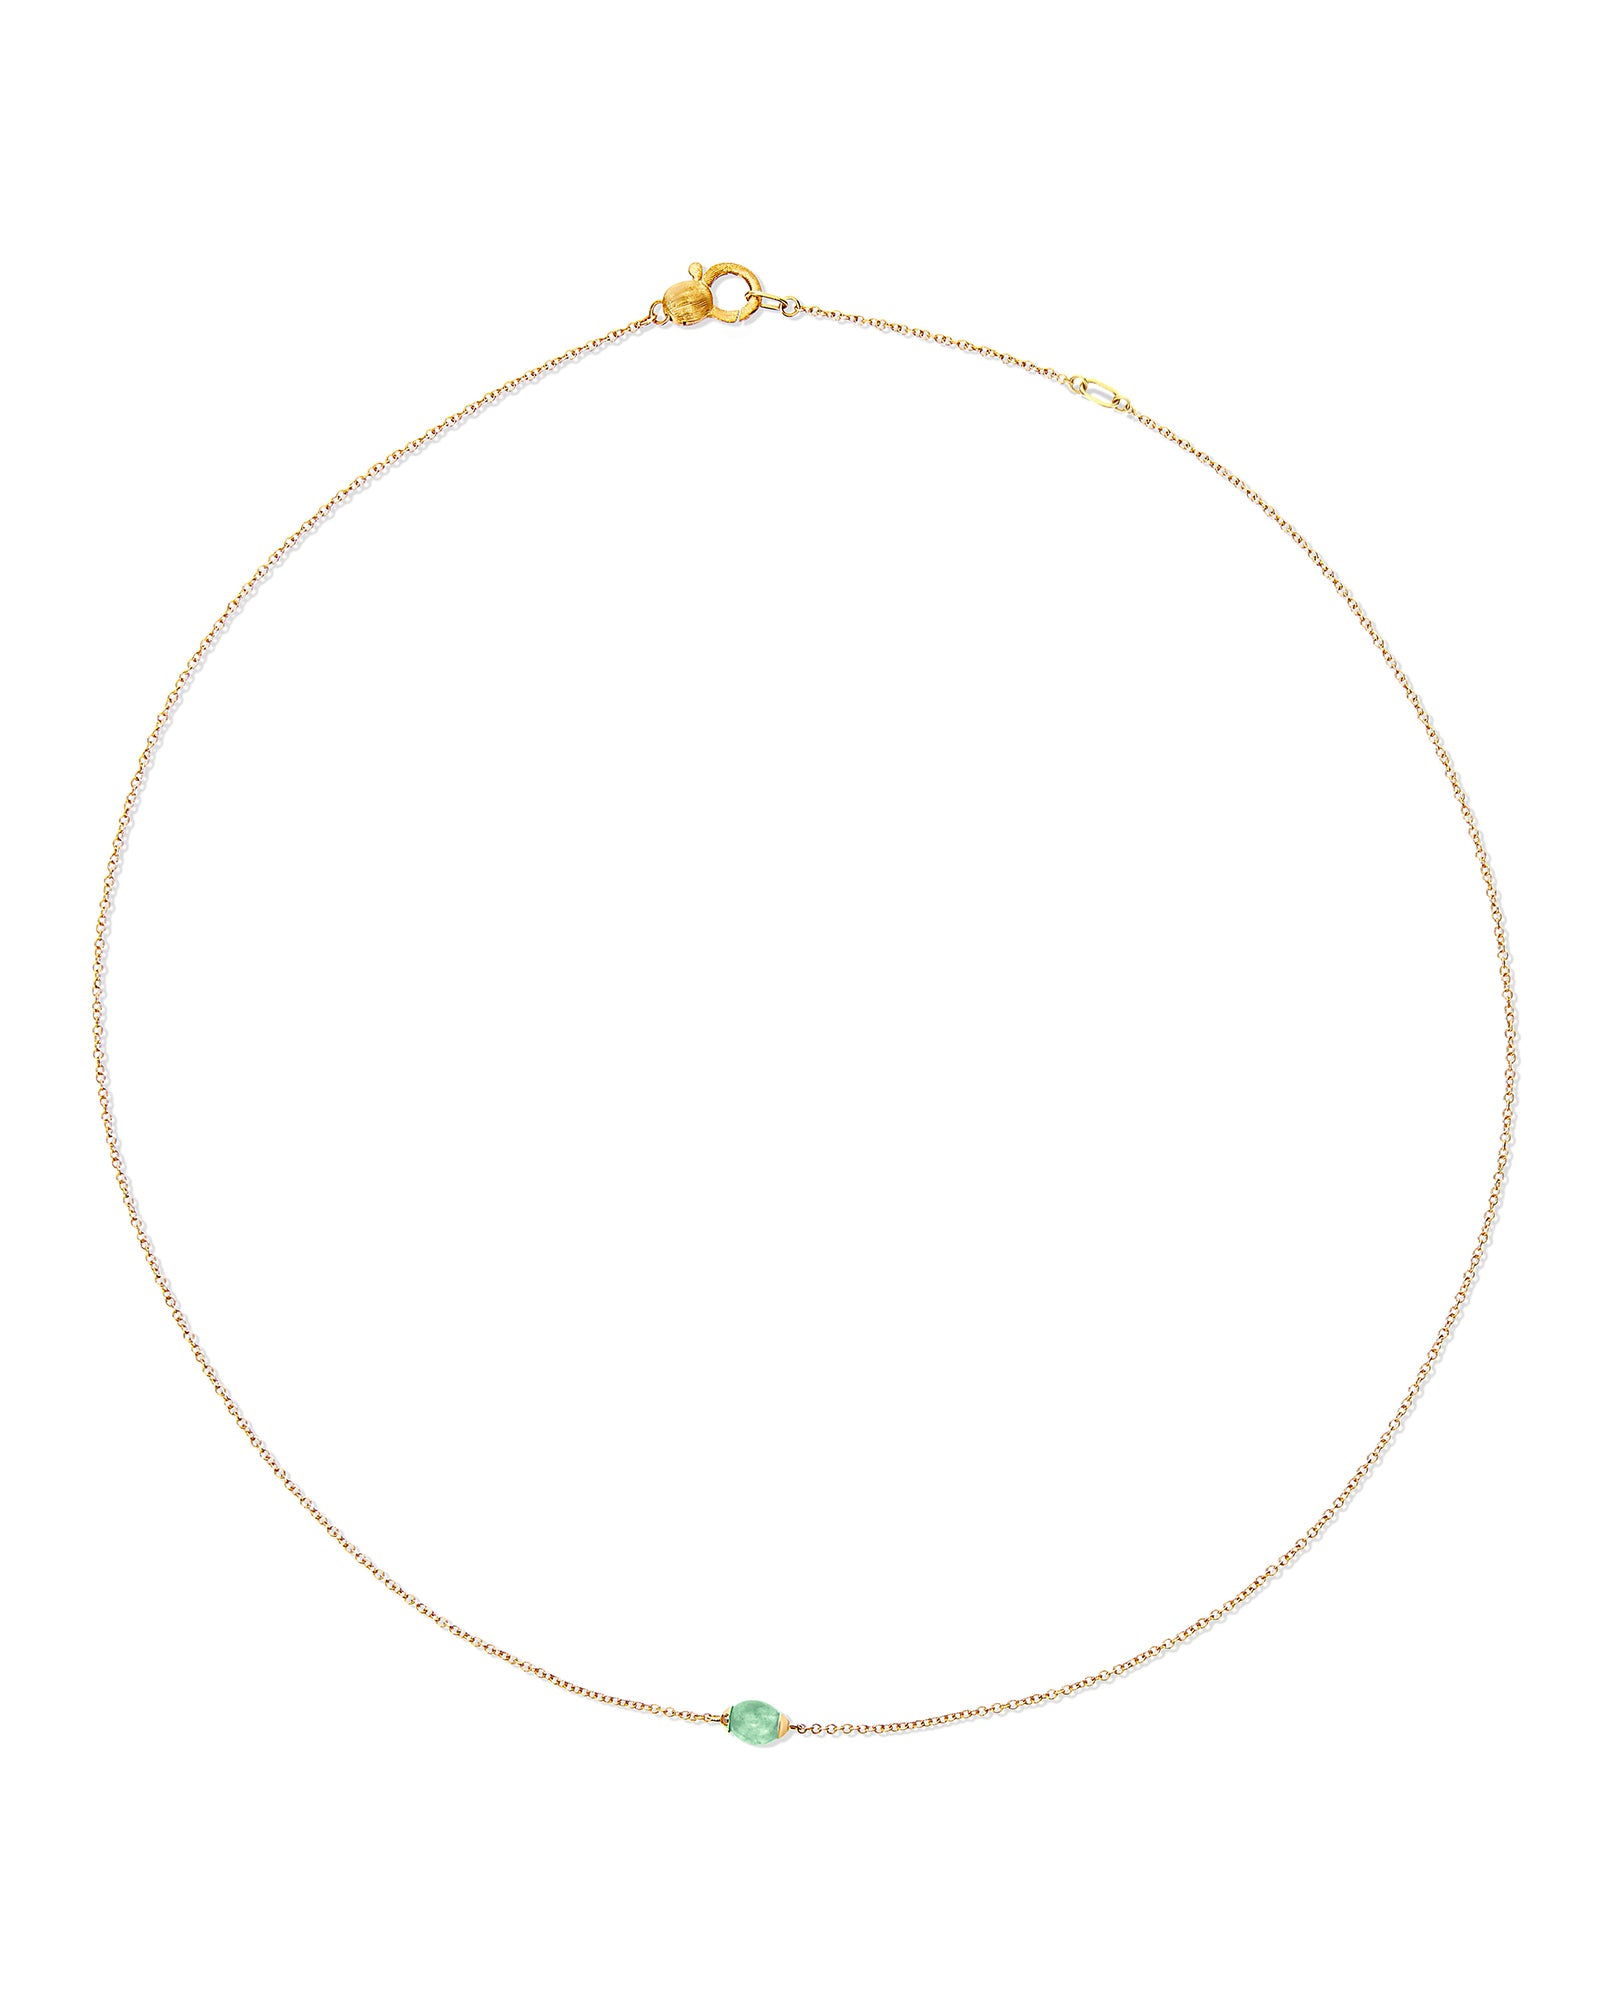 Amazonia "Amulets" Gold and Green Aventurine Necklace (SMALL)